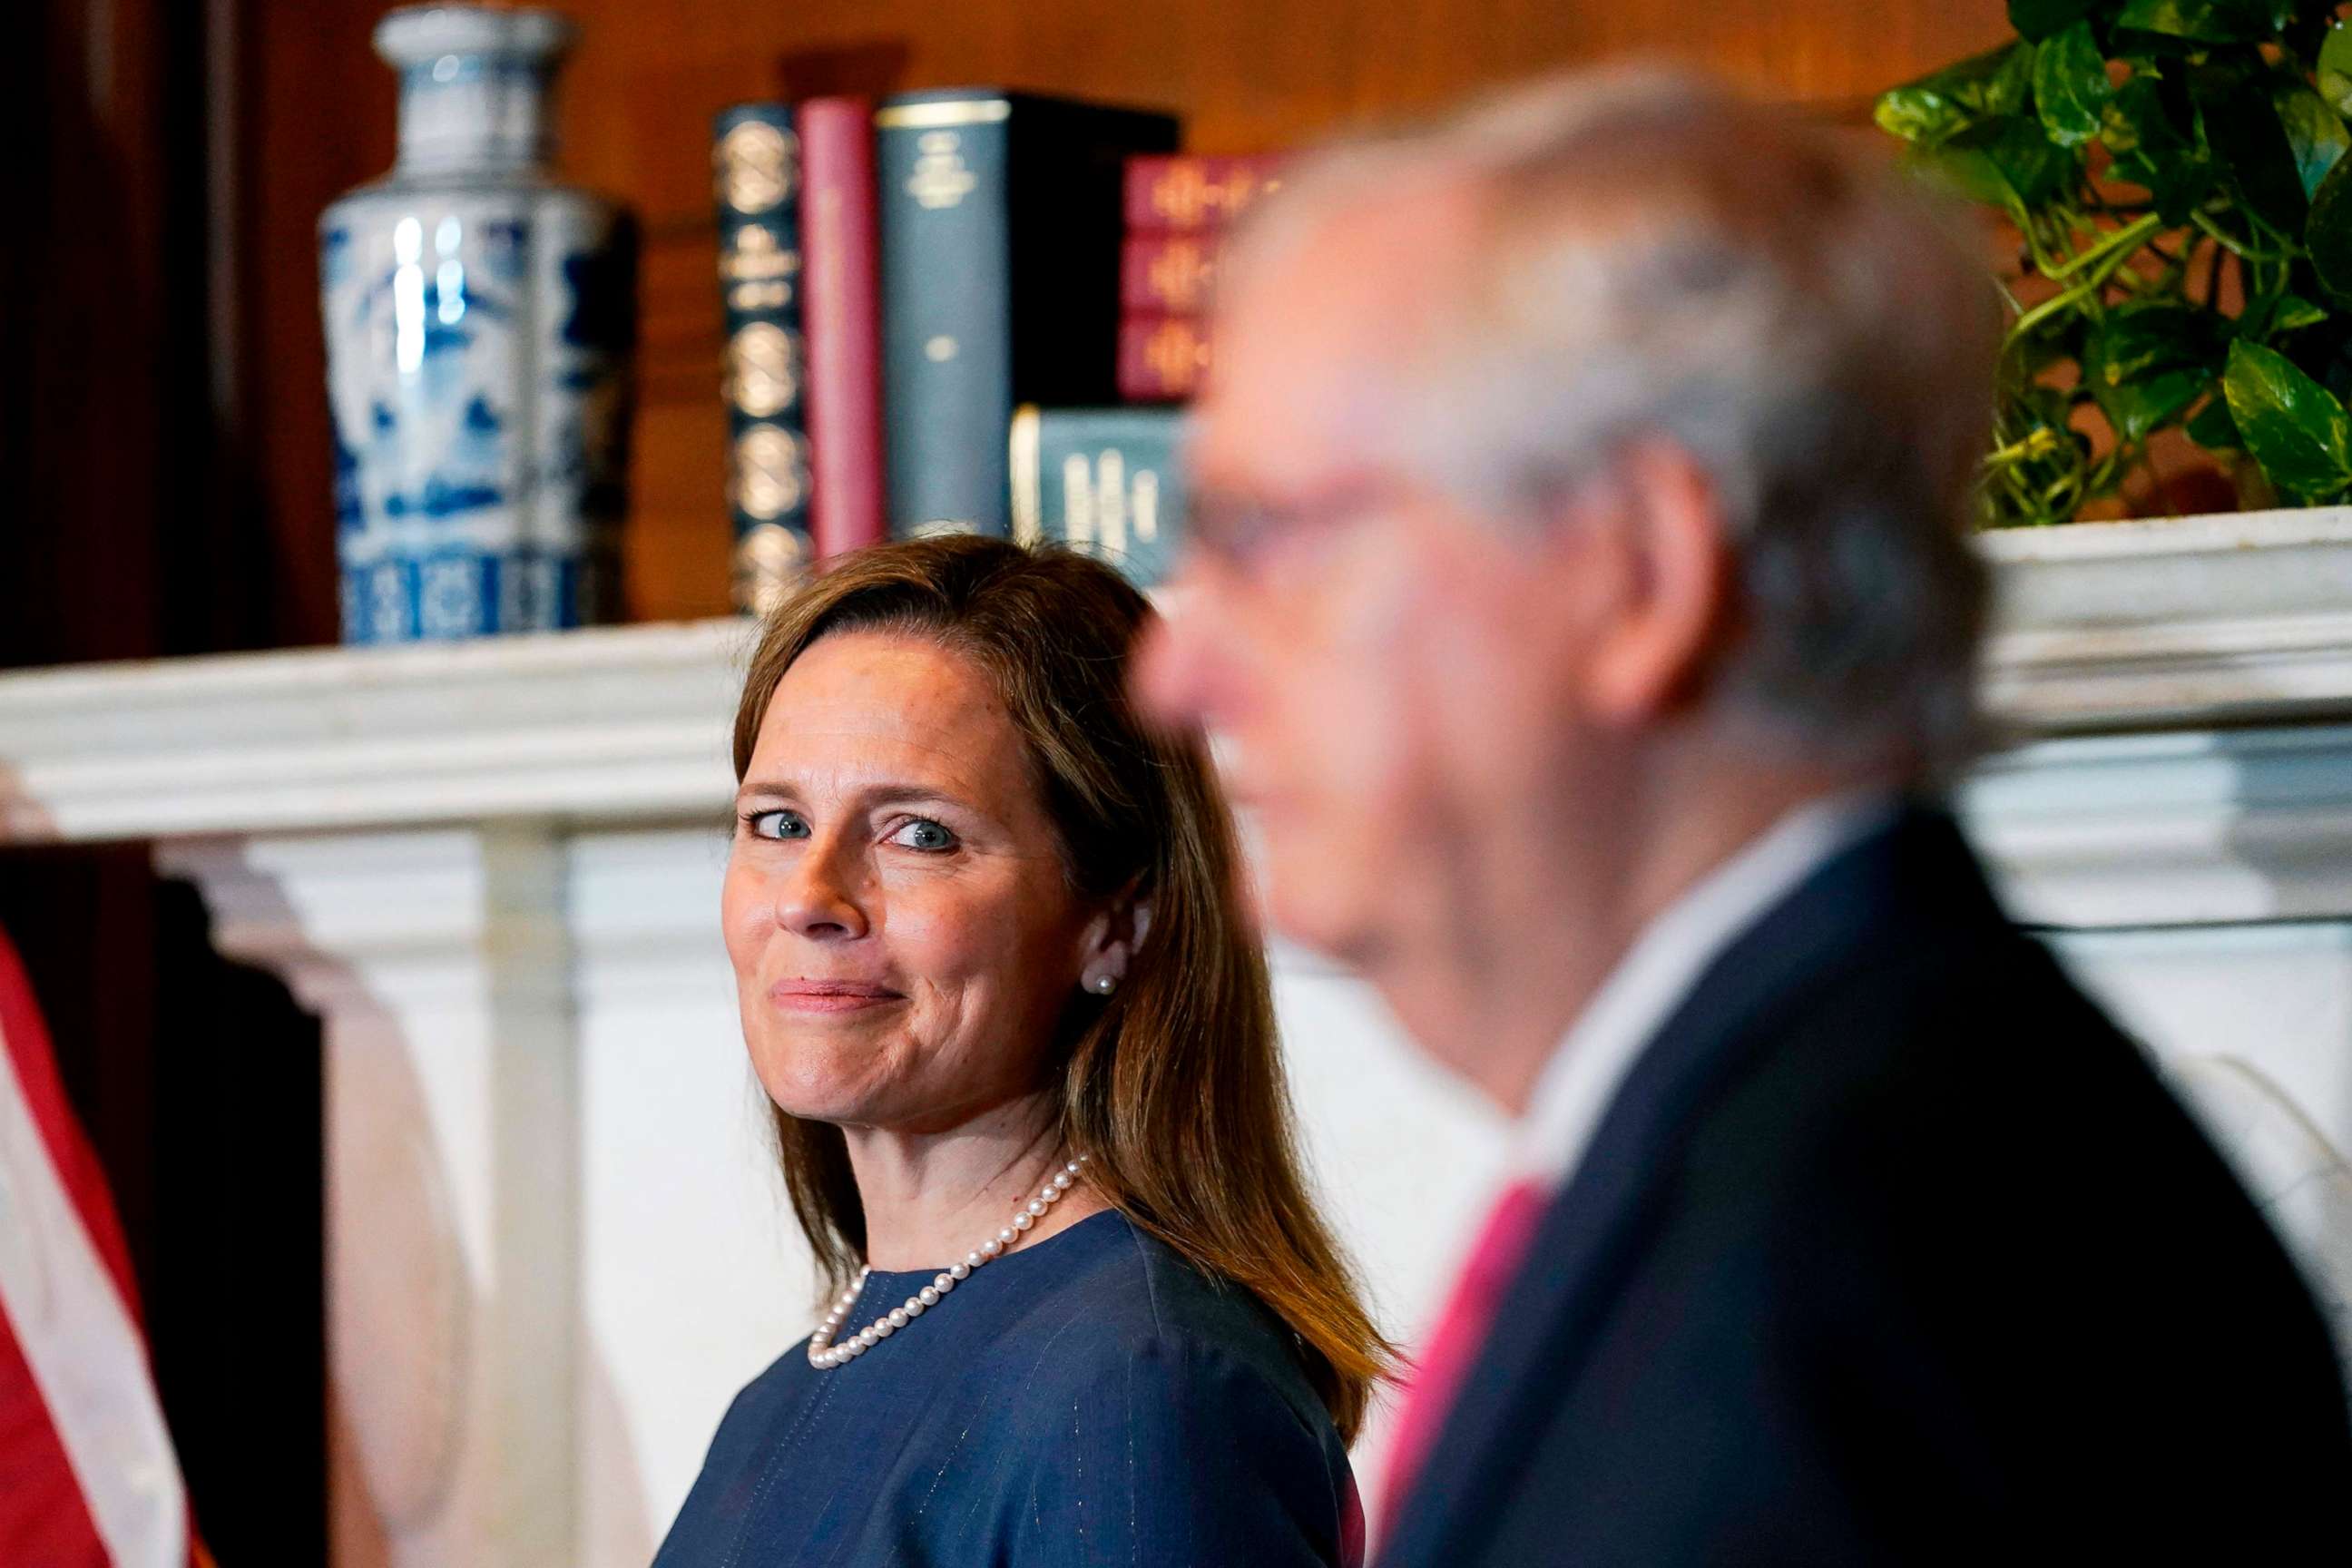 PHOTO: Senate Majority Leader Mitch McConnell of Kentucky, meets with Supreme Court nominee Judge Amy Coney Barrett on Capitol Hill in Washington, D.C. on Sept. 29, 2020.